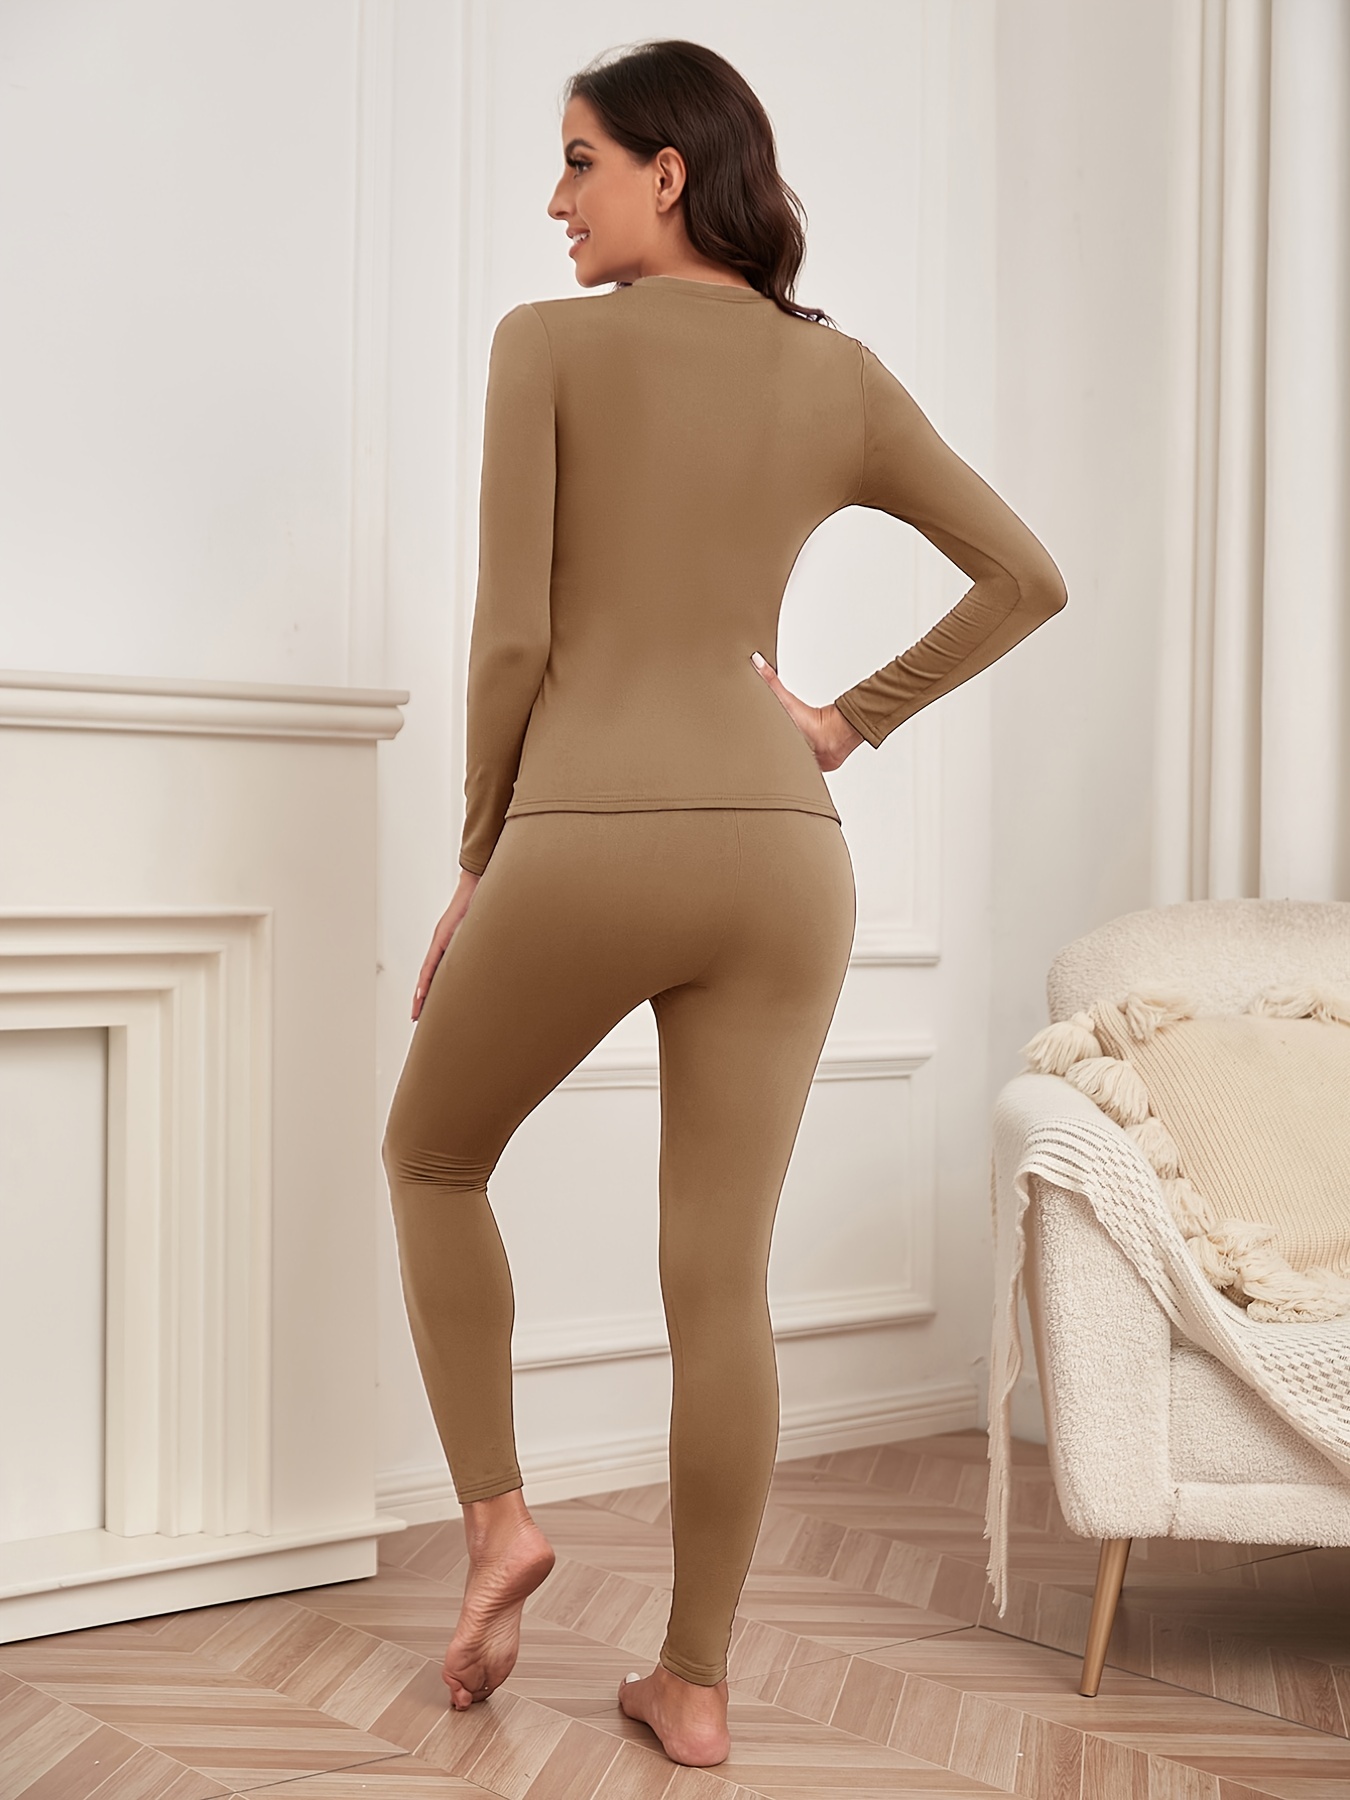 Thermal Underwear For Women Long Johns Fuzzy Lined Base Layer Top And  Bottom Sets